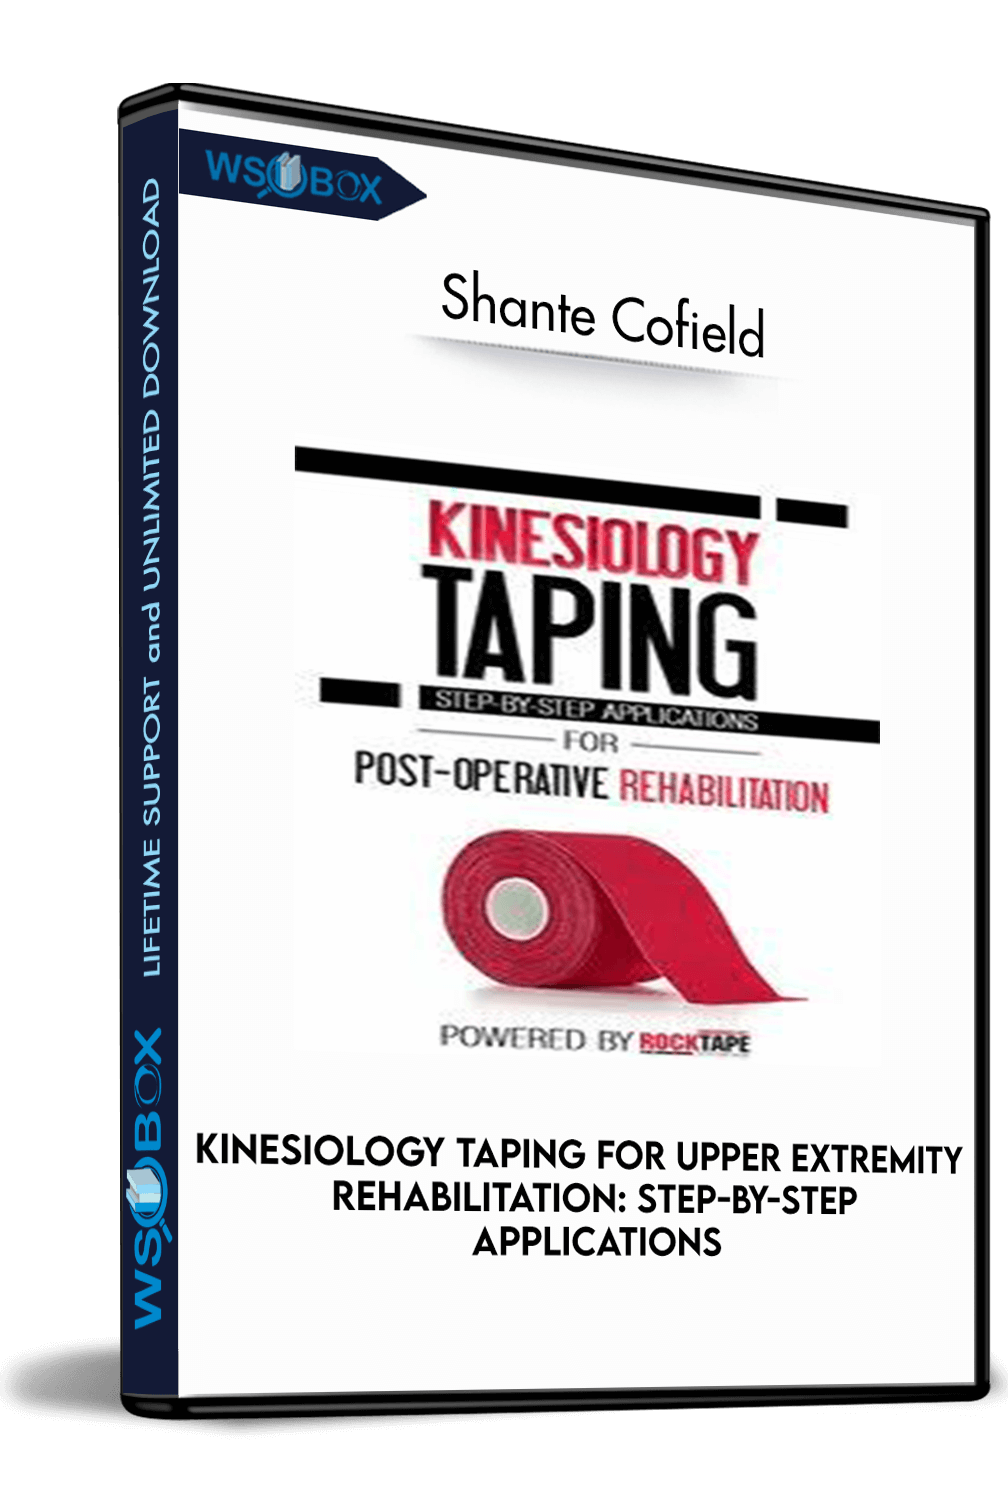 kinesiology-taping-for-post-operative-rehabilitation-step-by-step-applications-shante-cofield